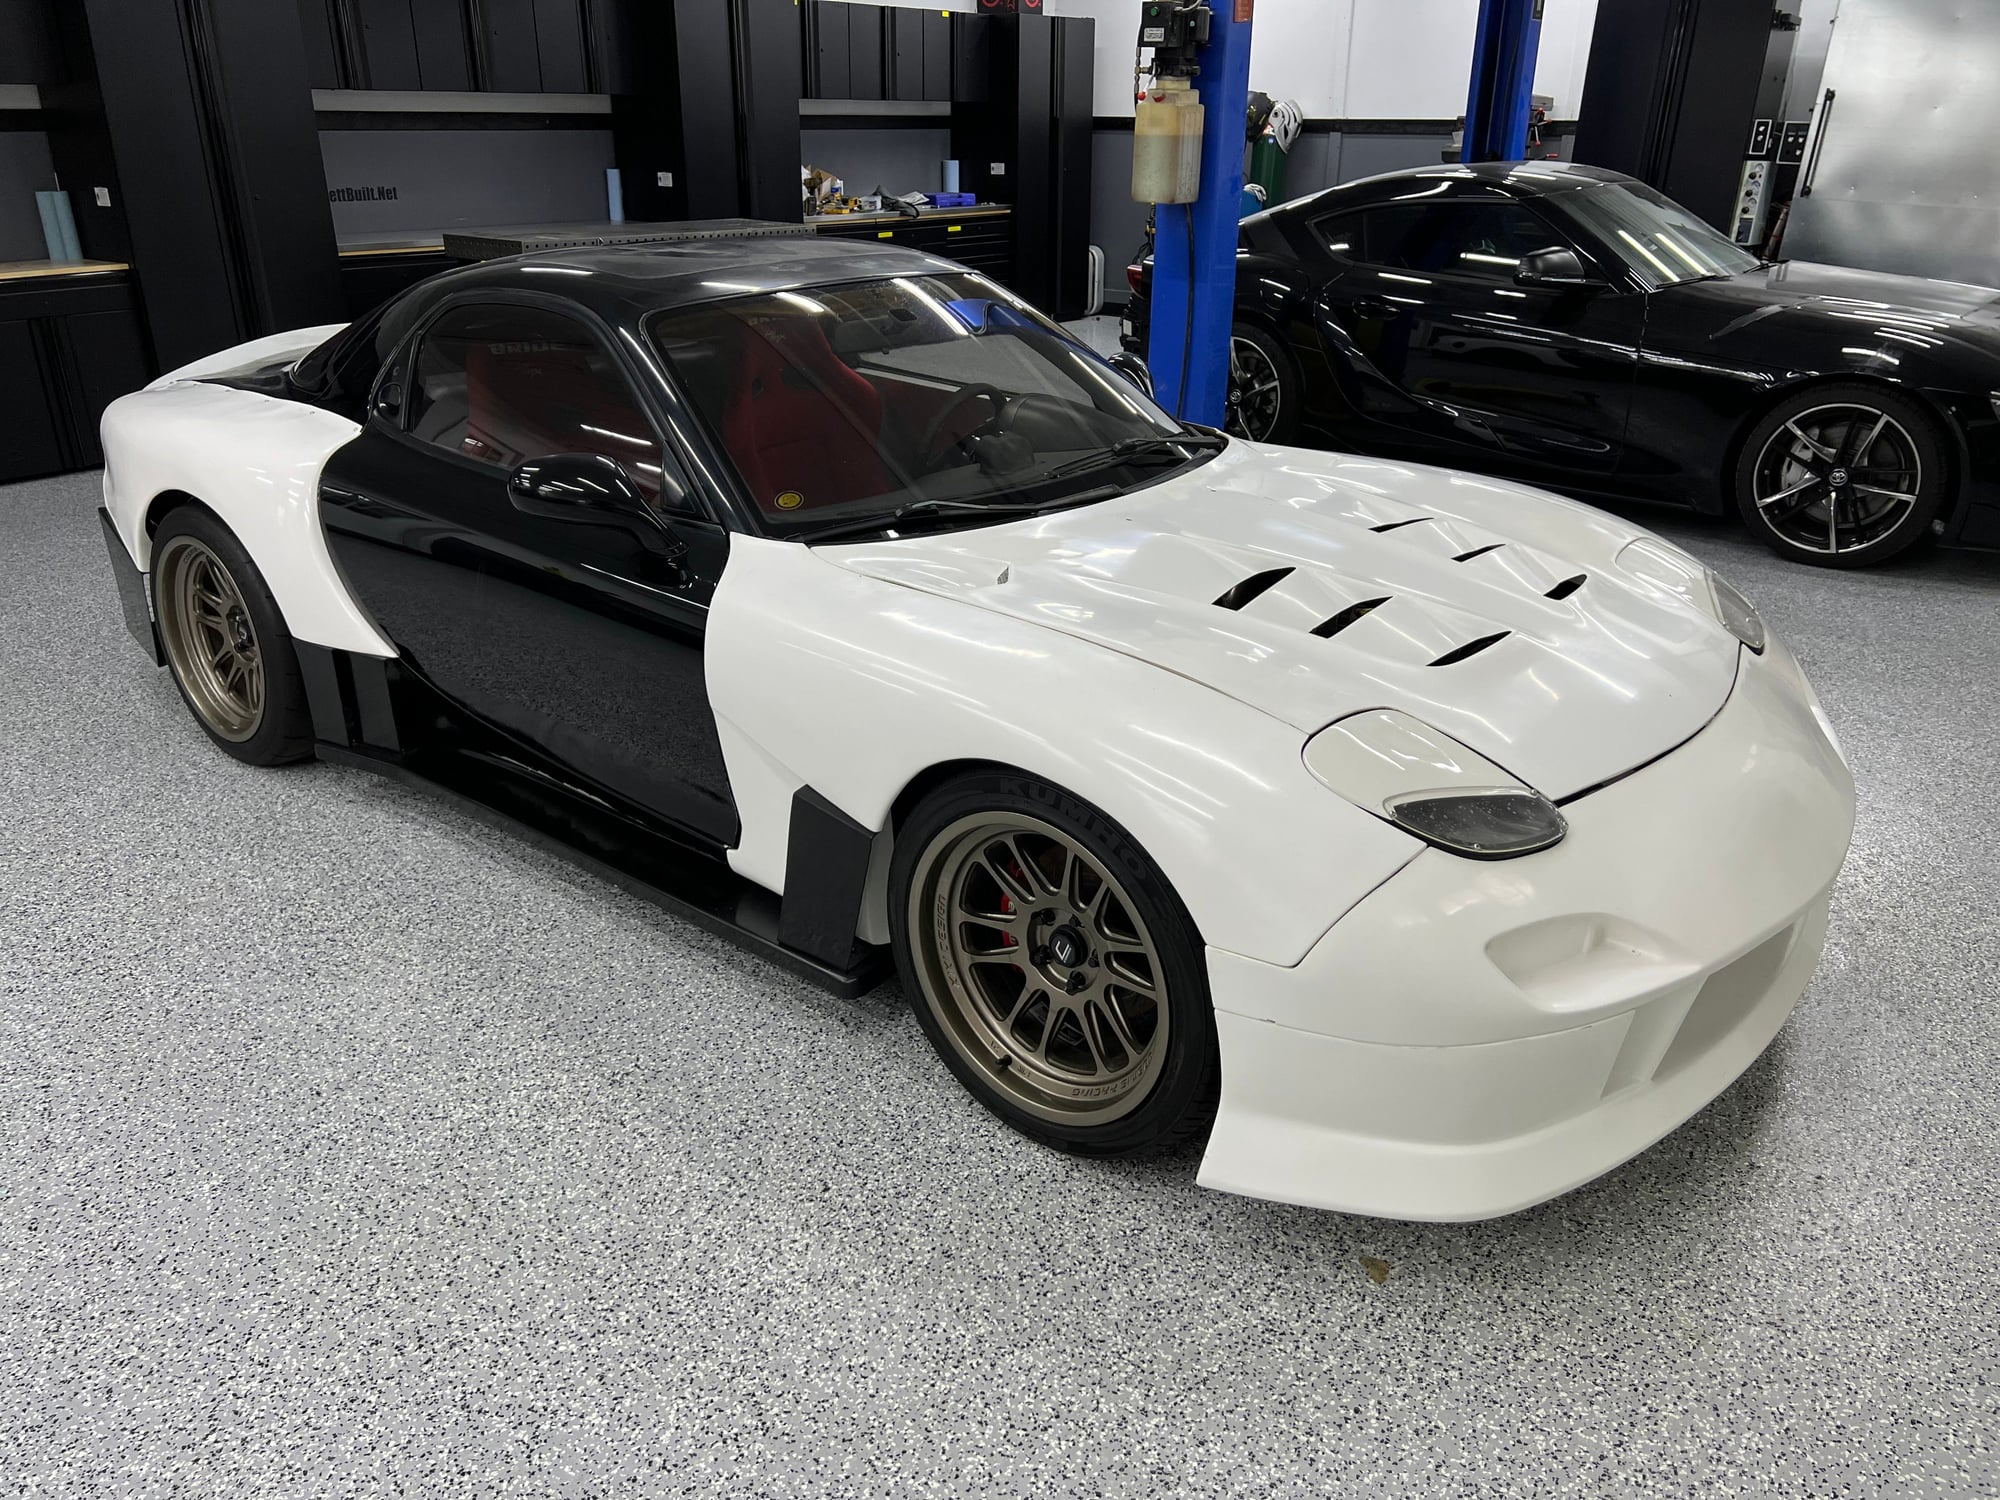 1993 Mazda RX-7 - 1993 Rx7 FD - widebody - single turbo - fuel cell - highly modified - Used - VIN JM1FD3315P0208924 - 95,000 Miles - Other - 2WD - Manual - Coupe - Black - Palmetto, FL 34221, United States